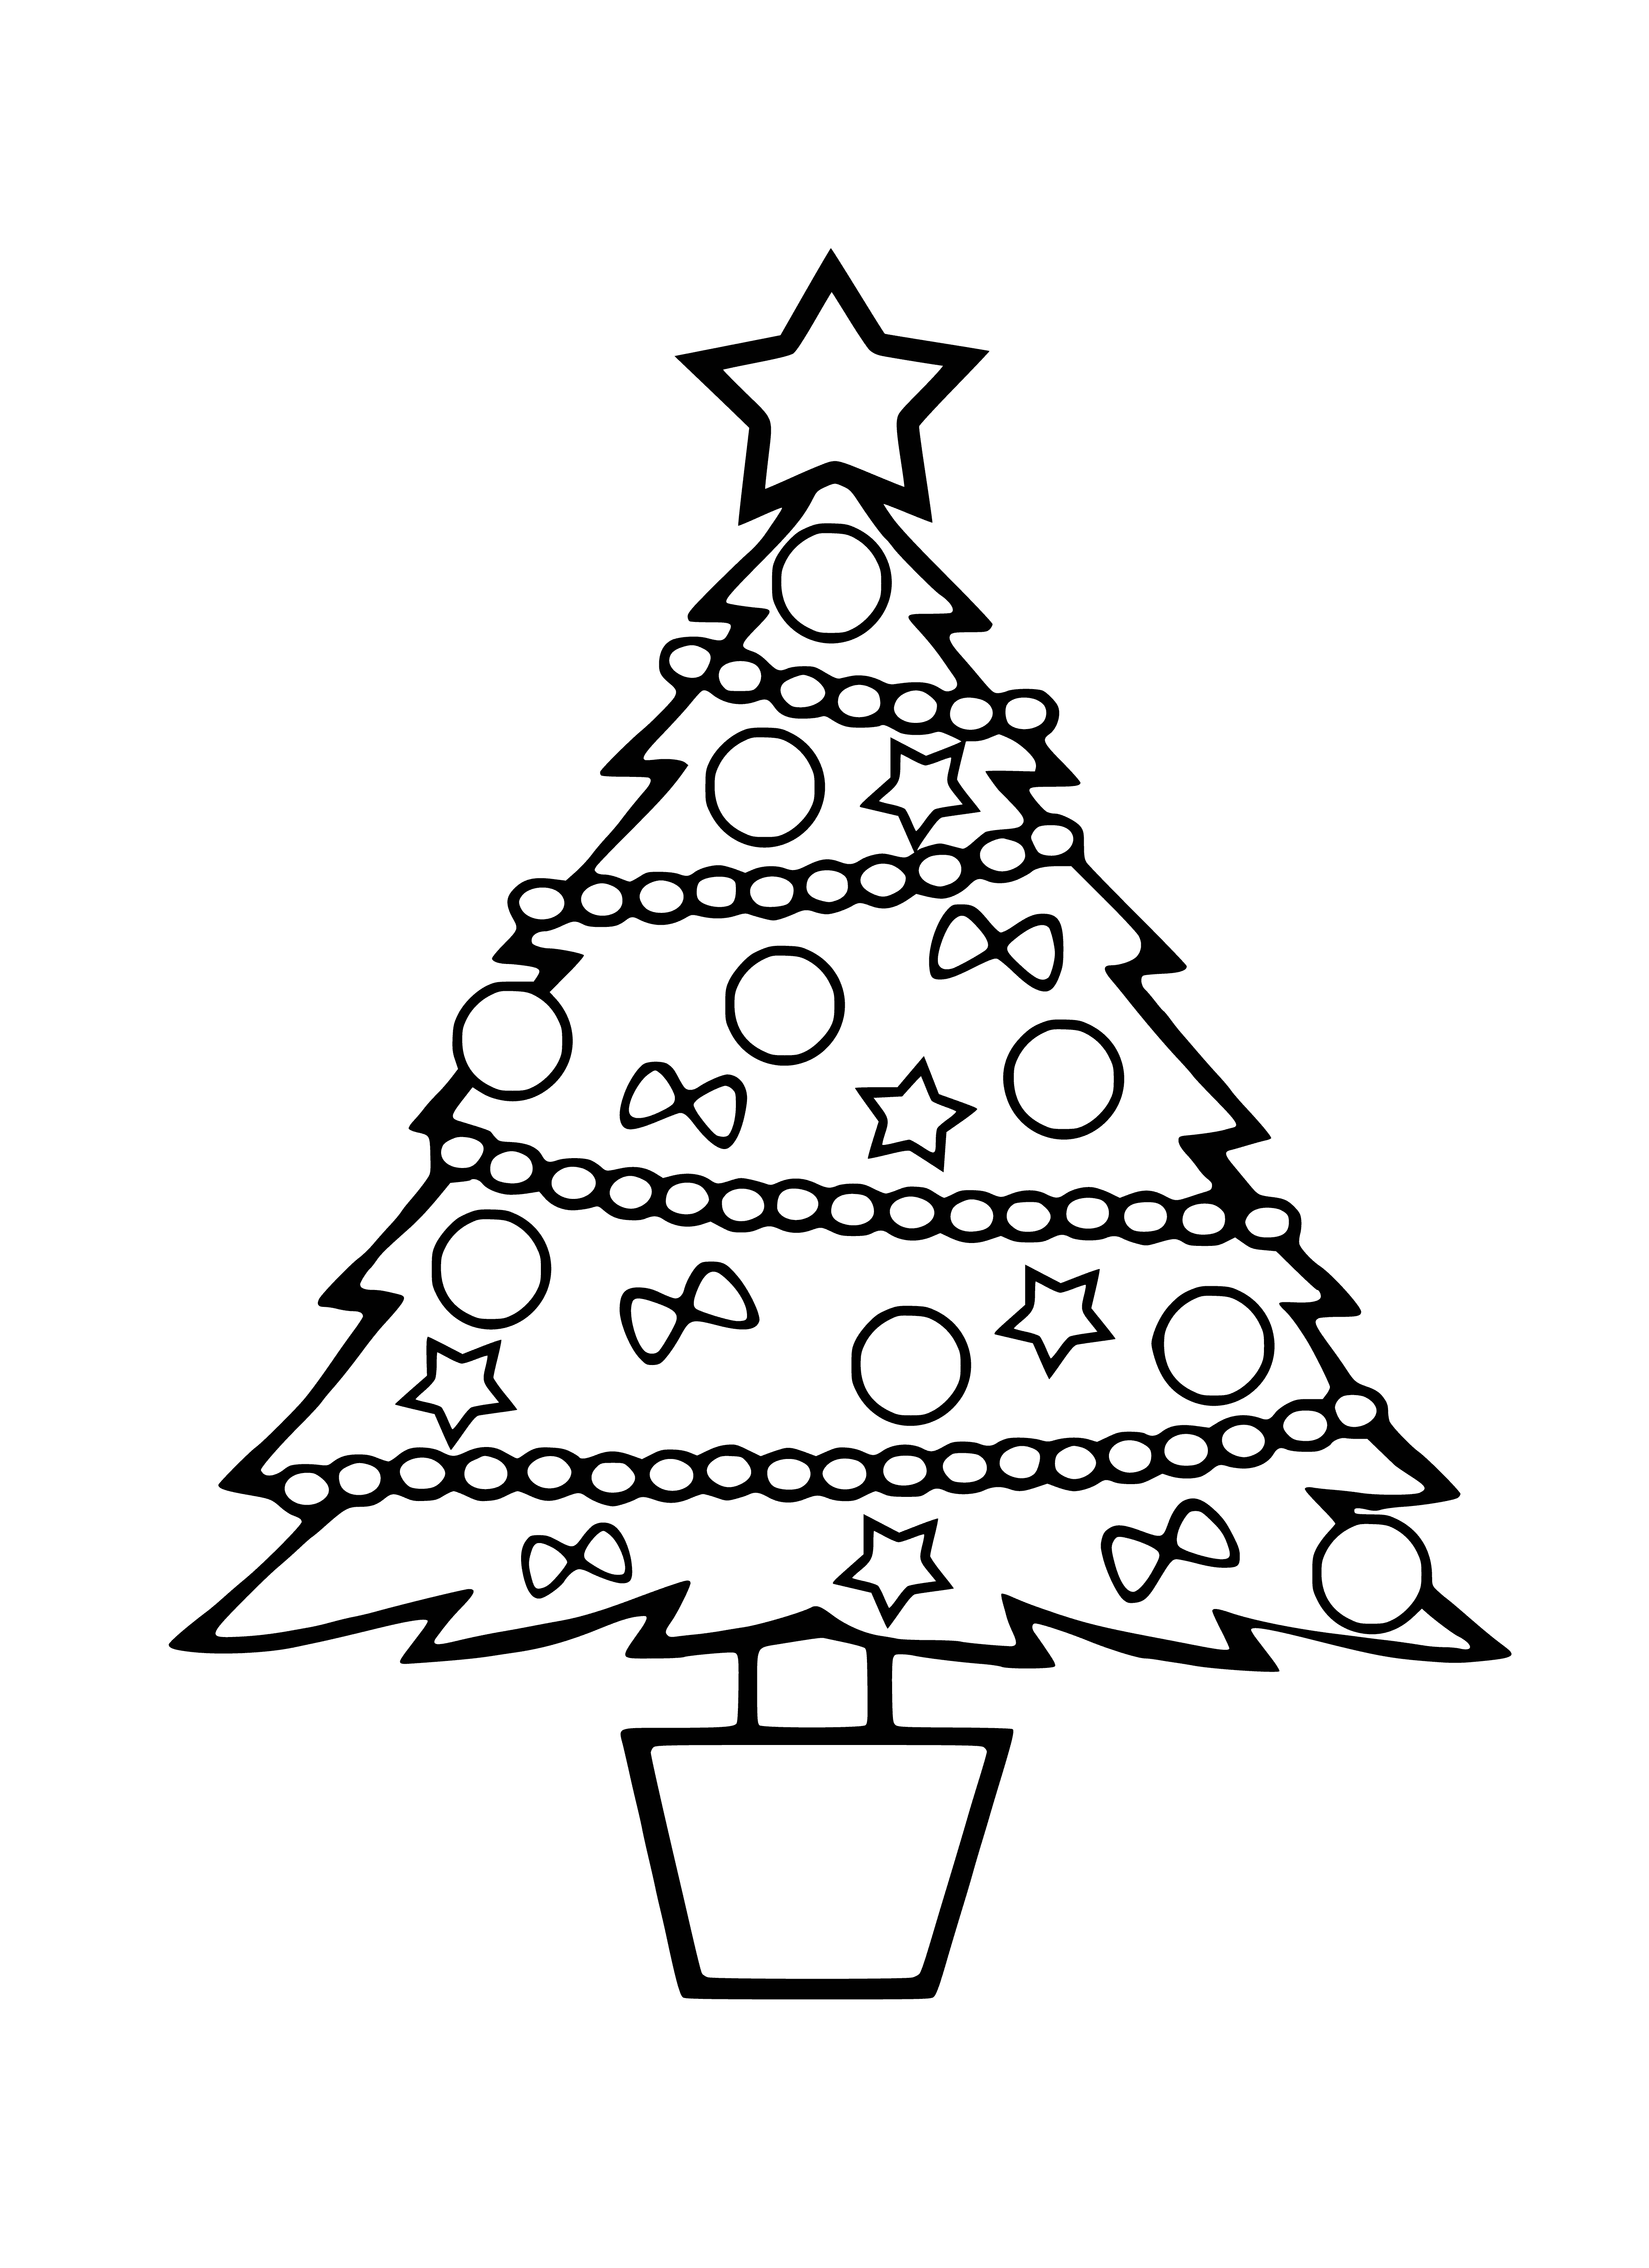 Two Christmas trees, gifts, & kids smiling: a festive coloring page full of lights & ornaments perfect for a holiday activity!